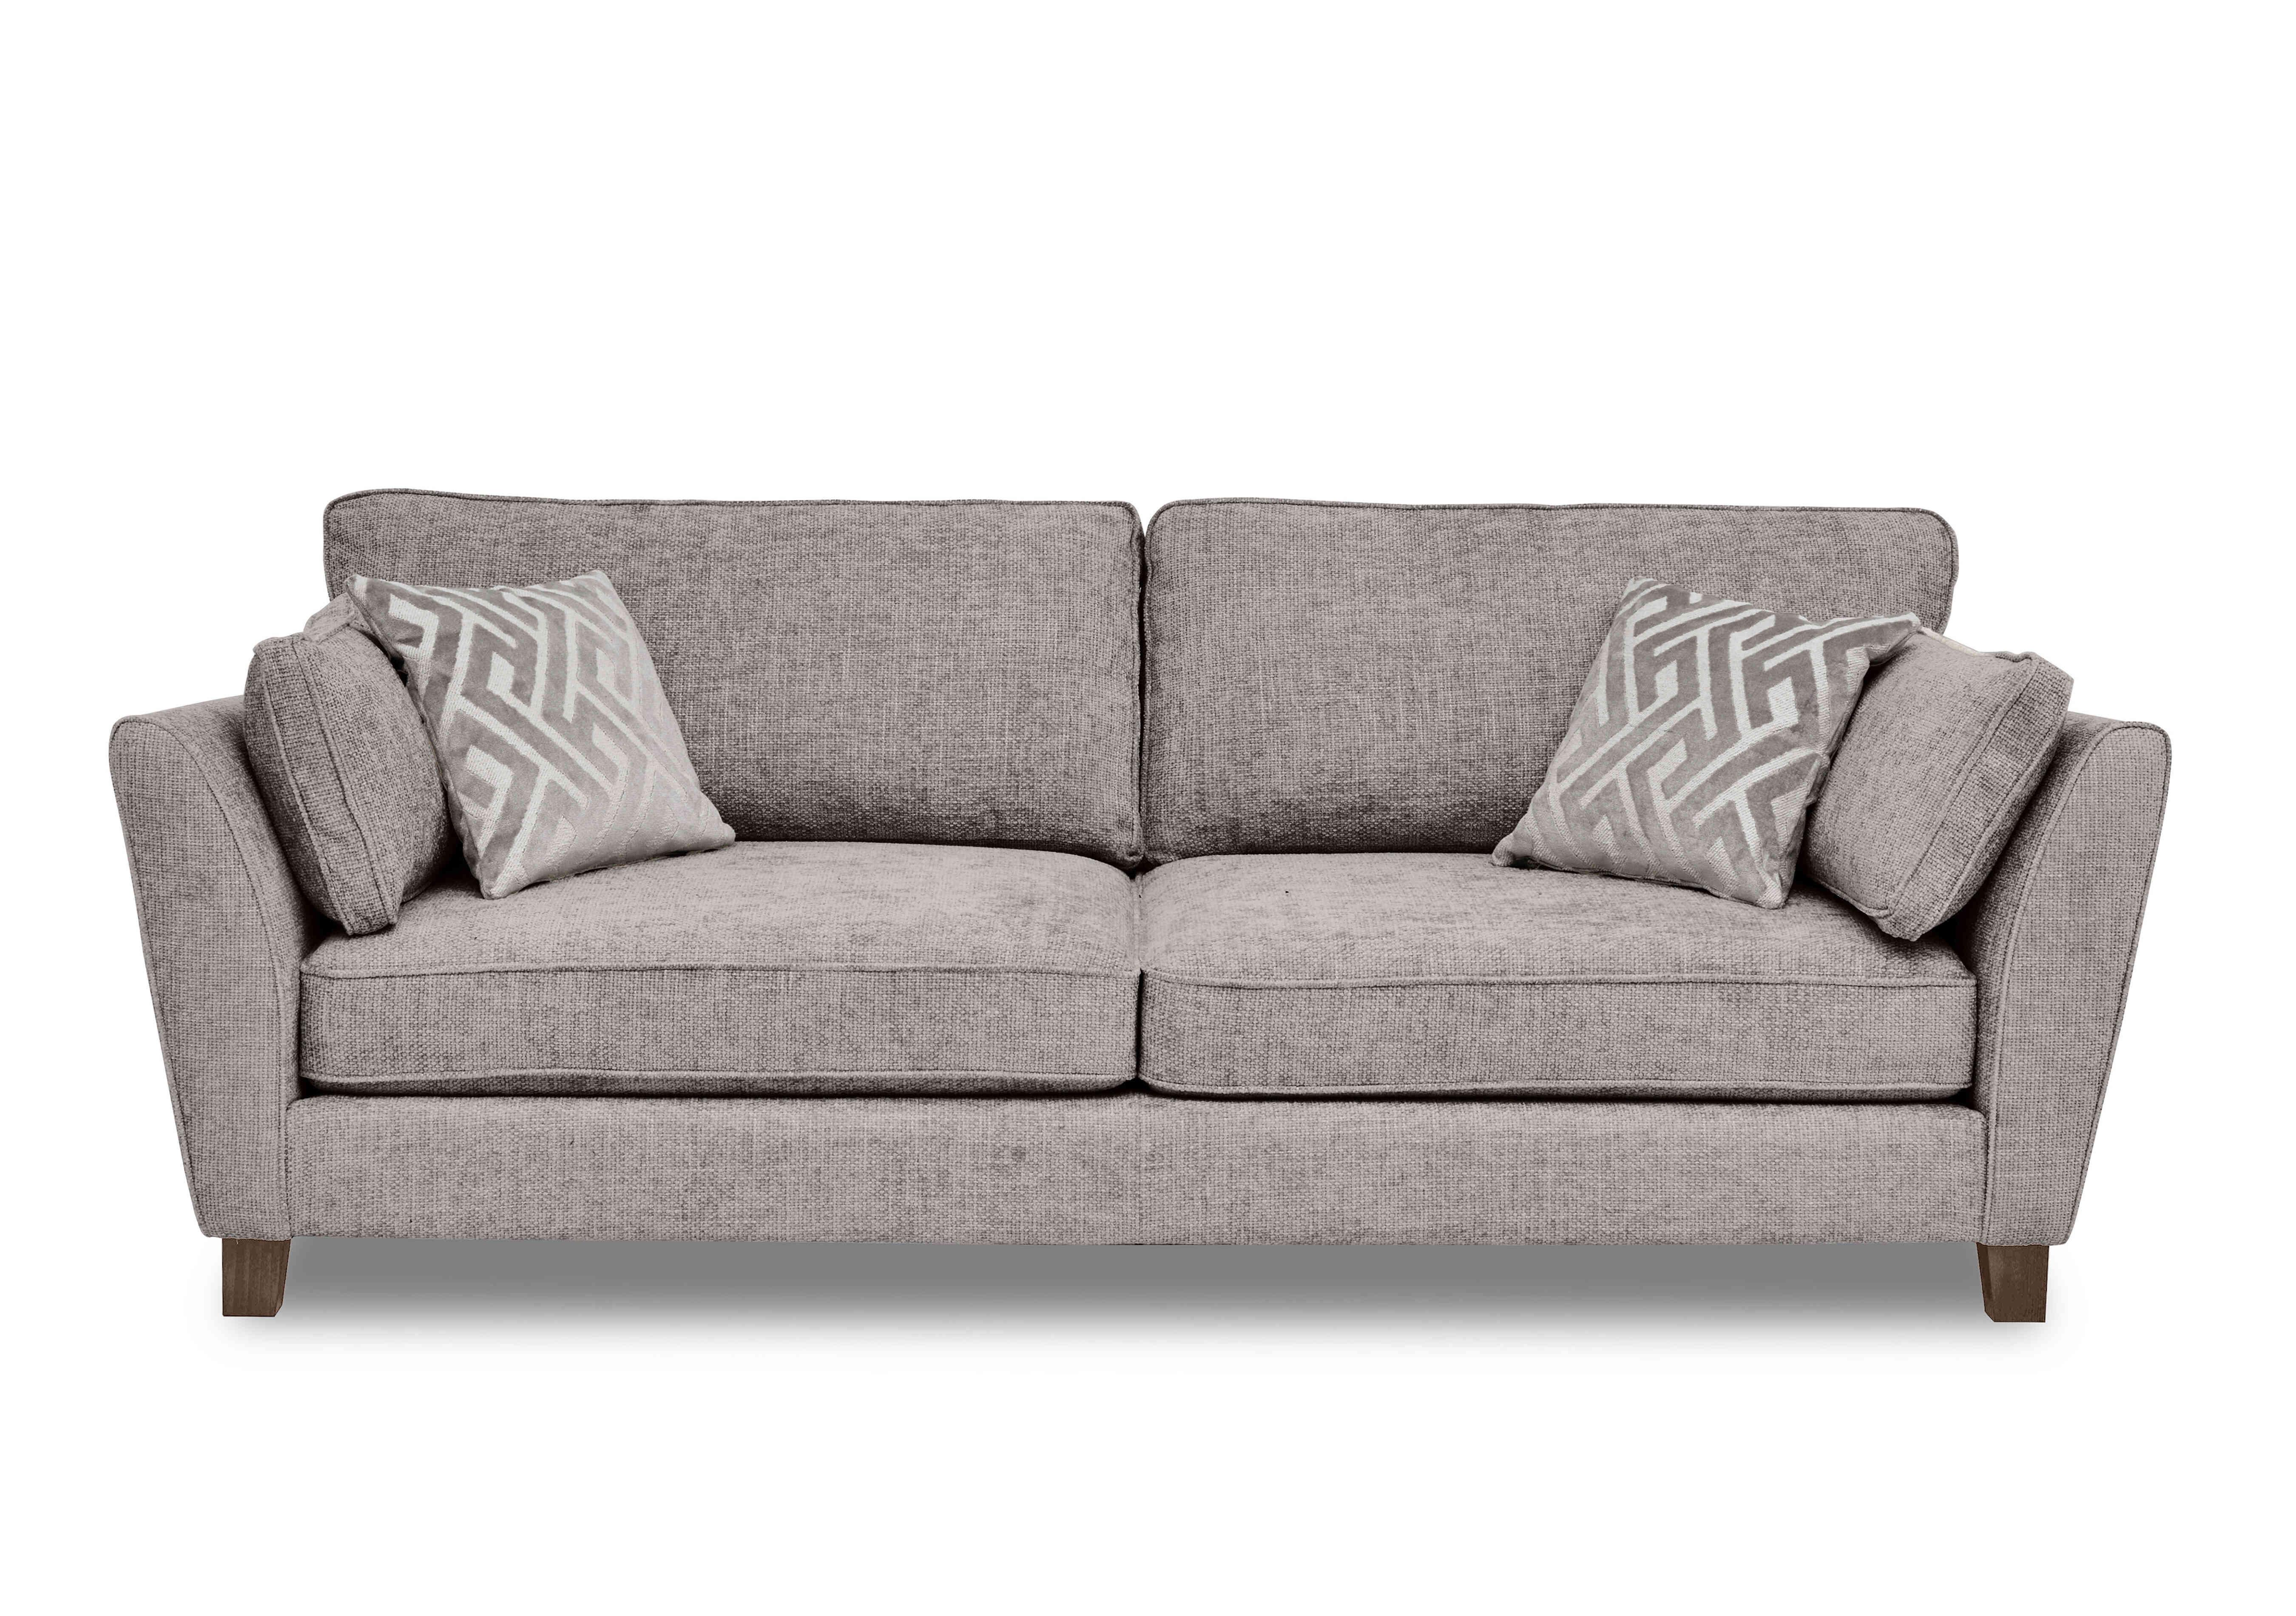 Tabitha 4 Seater Sofa in Ivory on Furniture Village